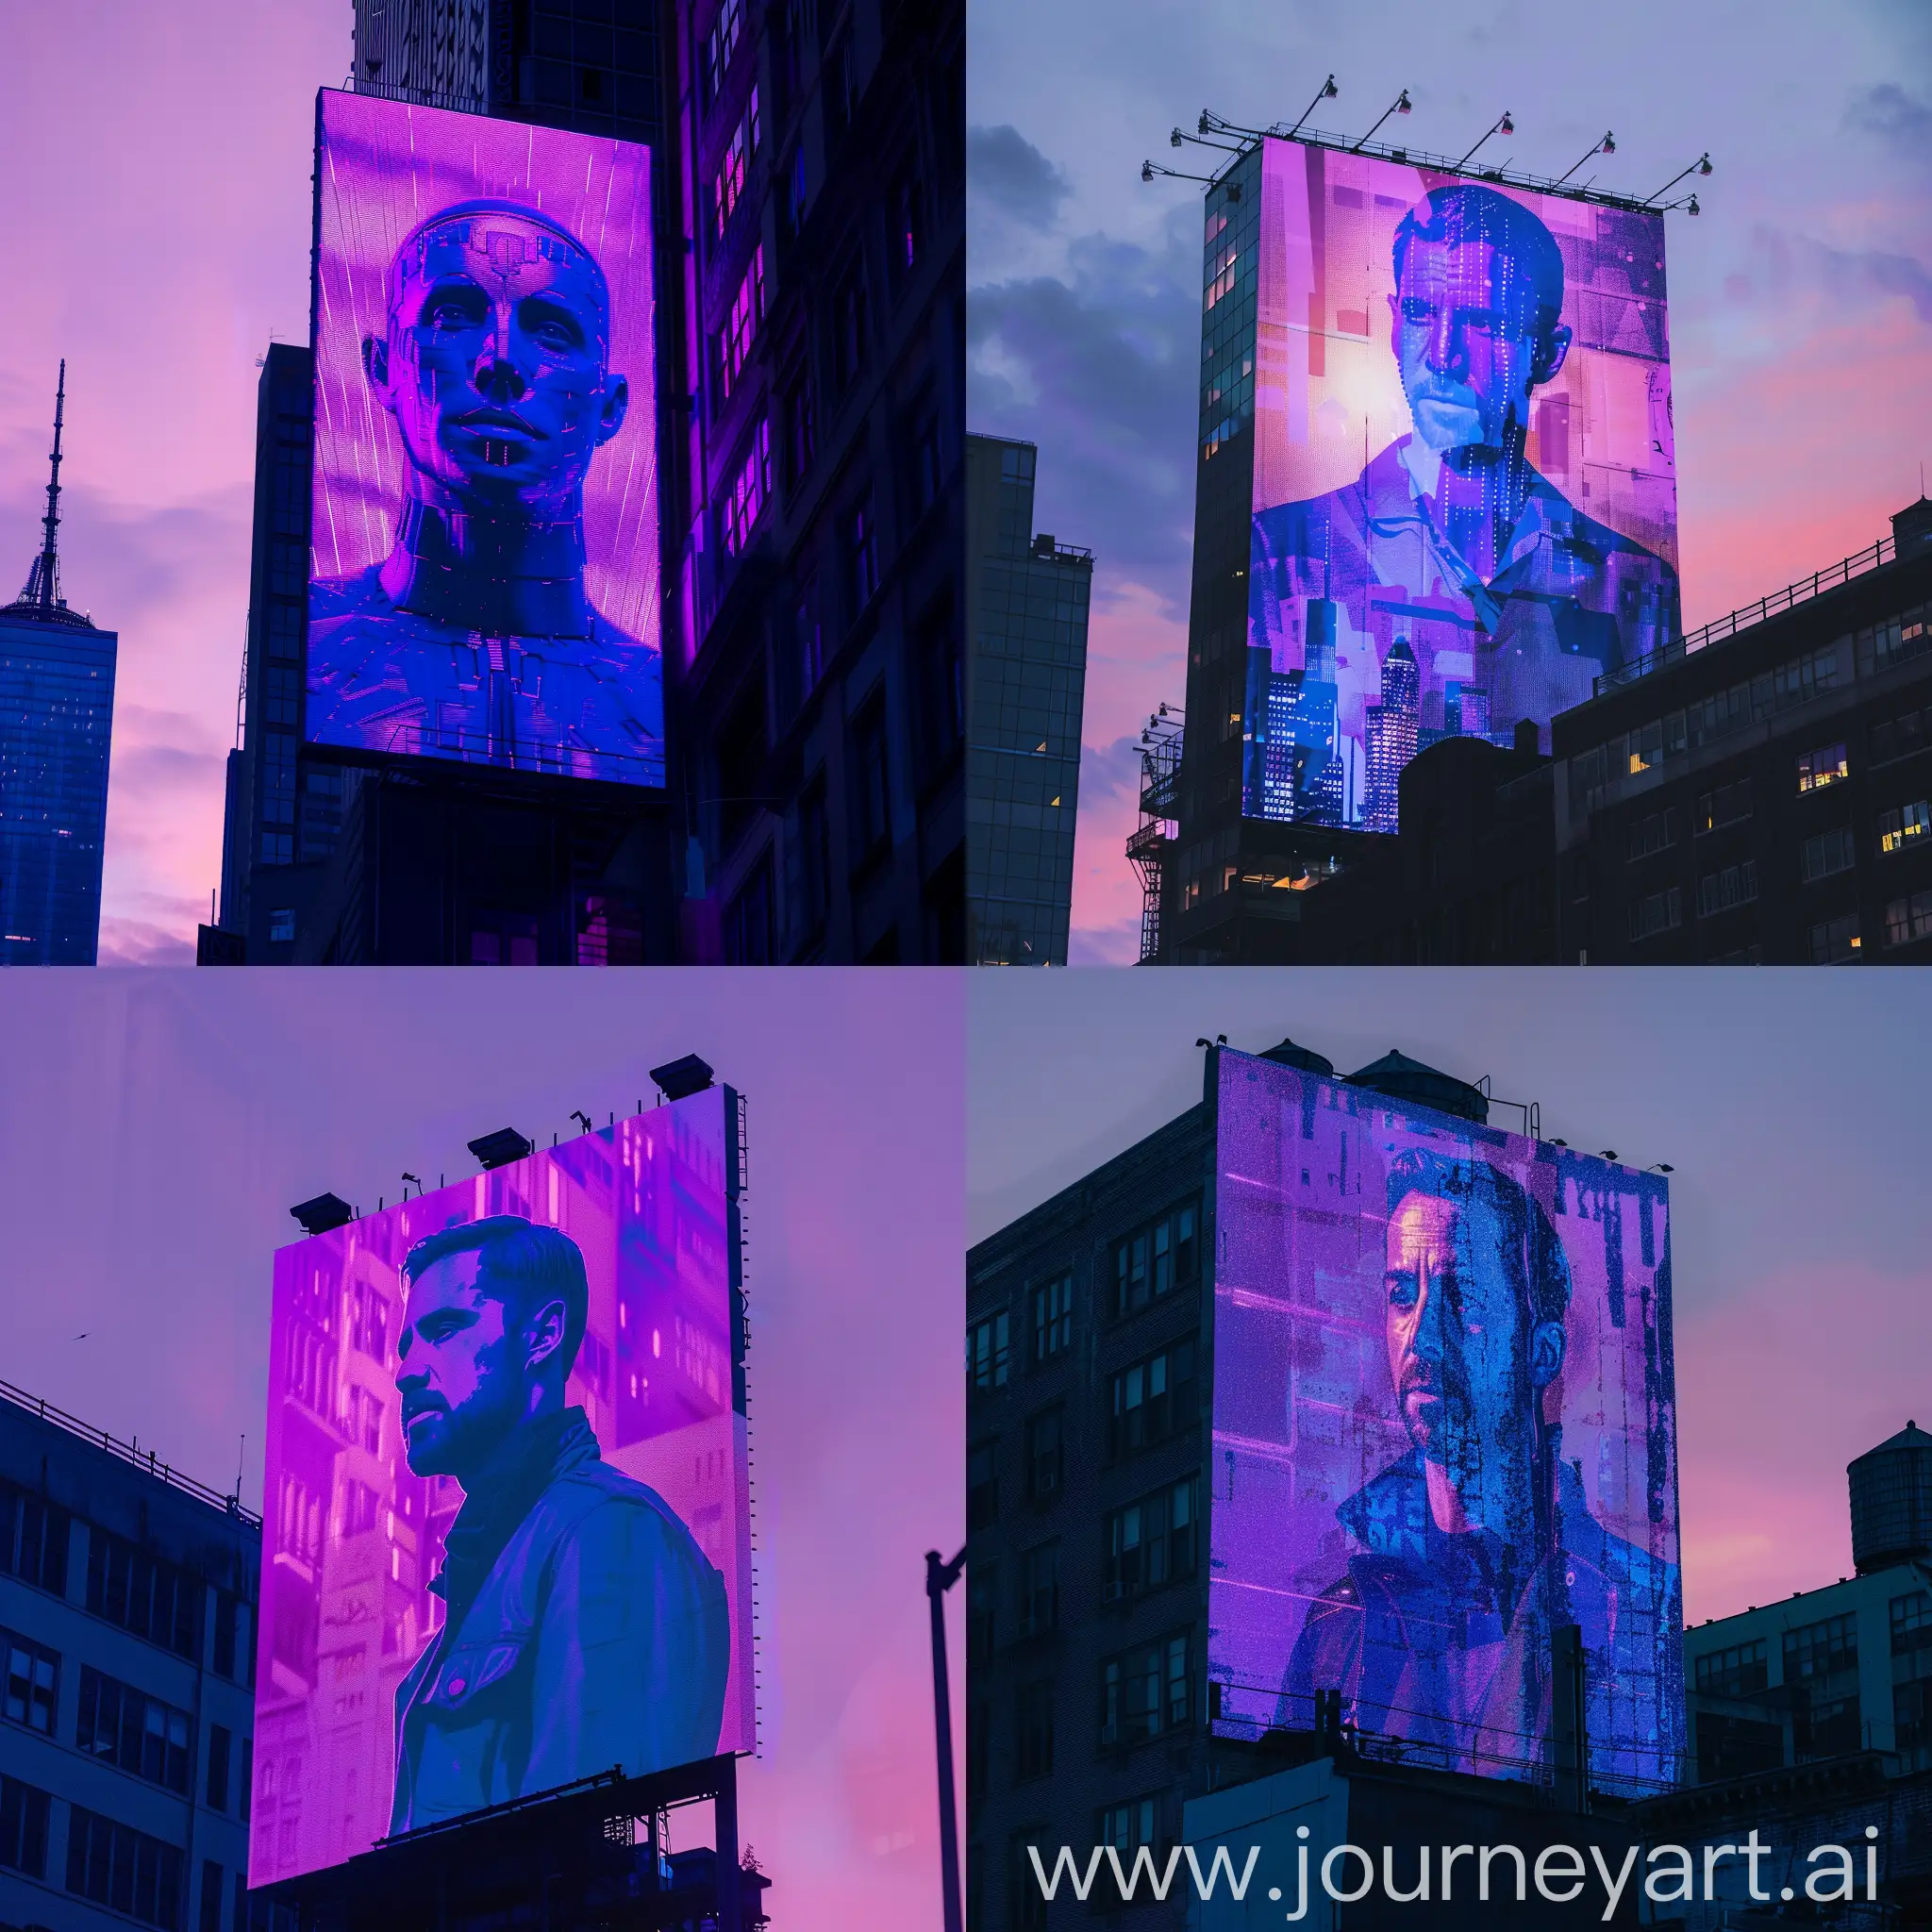 a purple blue holographic digital ryan gosling on the billboard building, sunset time, style raw, futuristic, close up, city, year 2049, new york city, natural lighting, dystopain,

